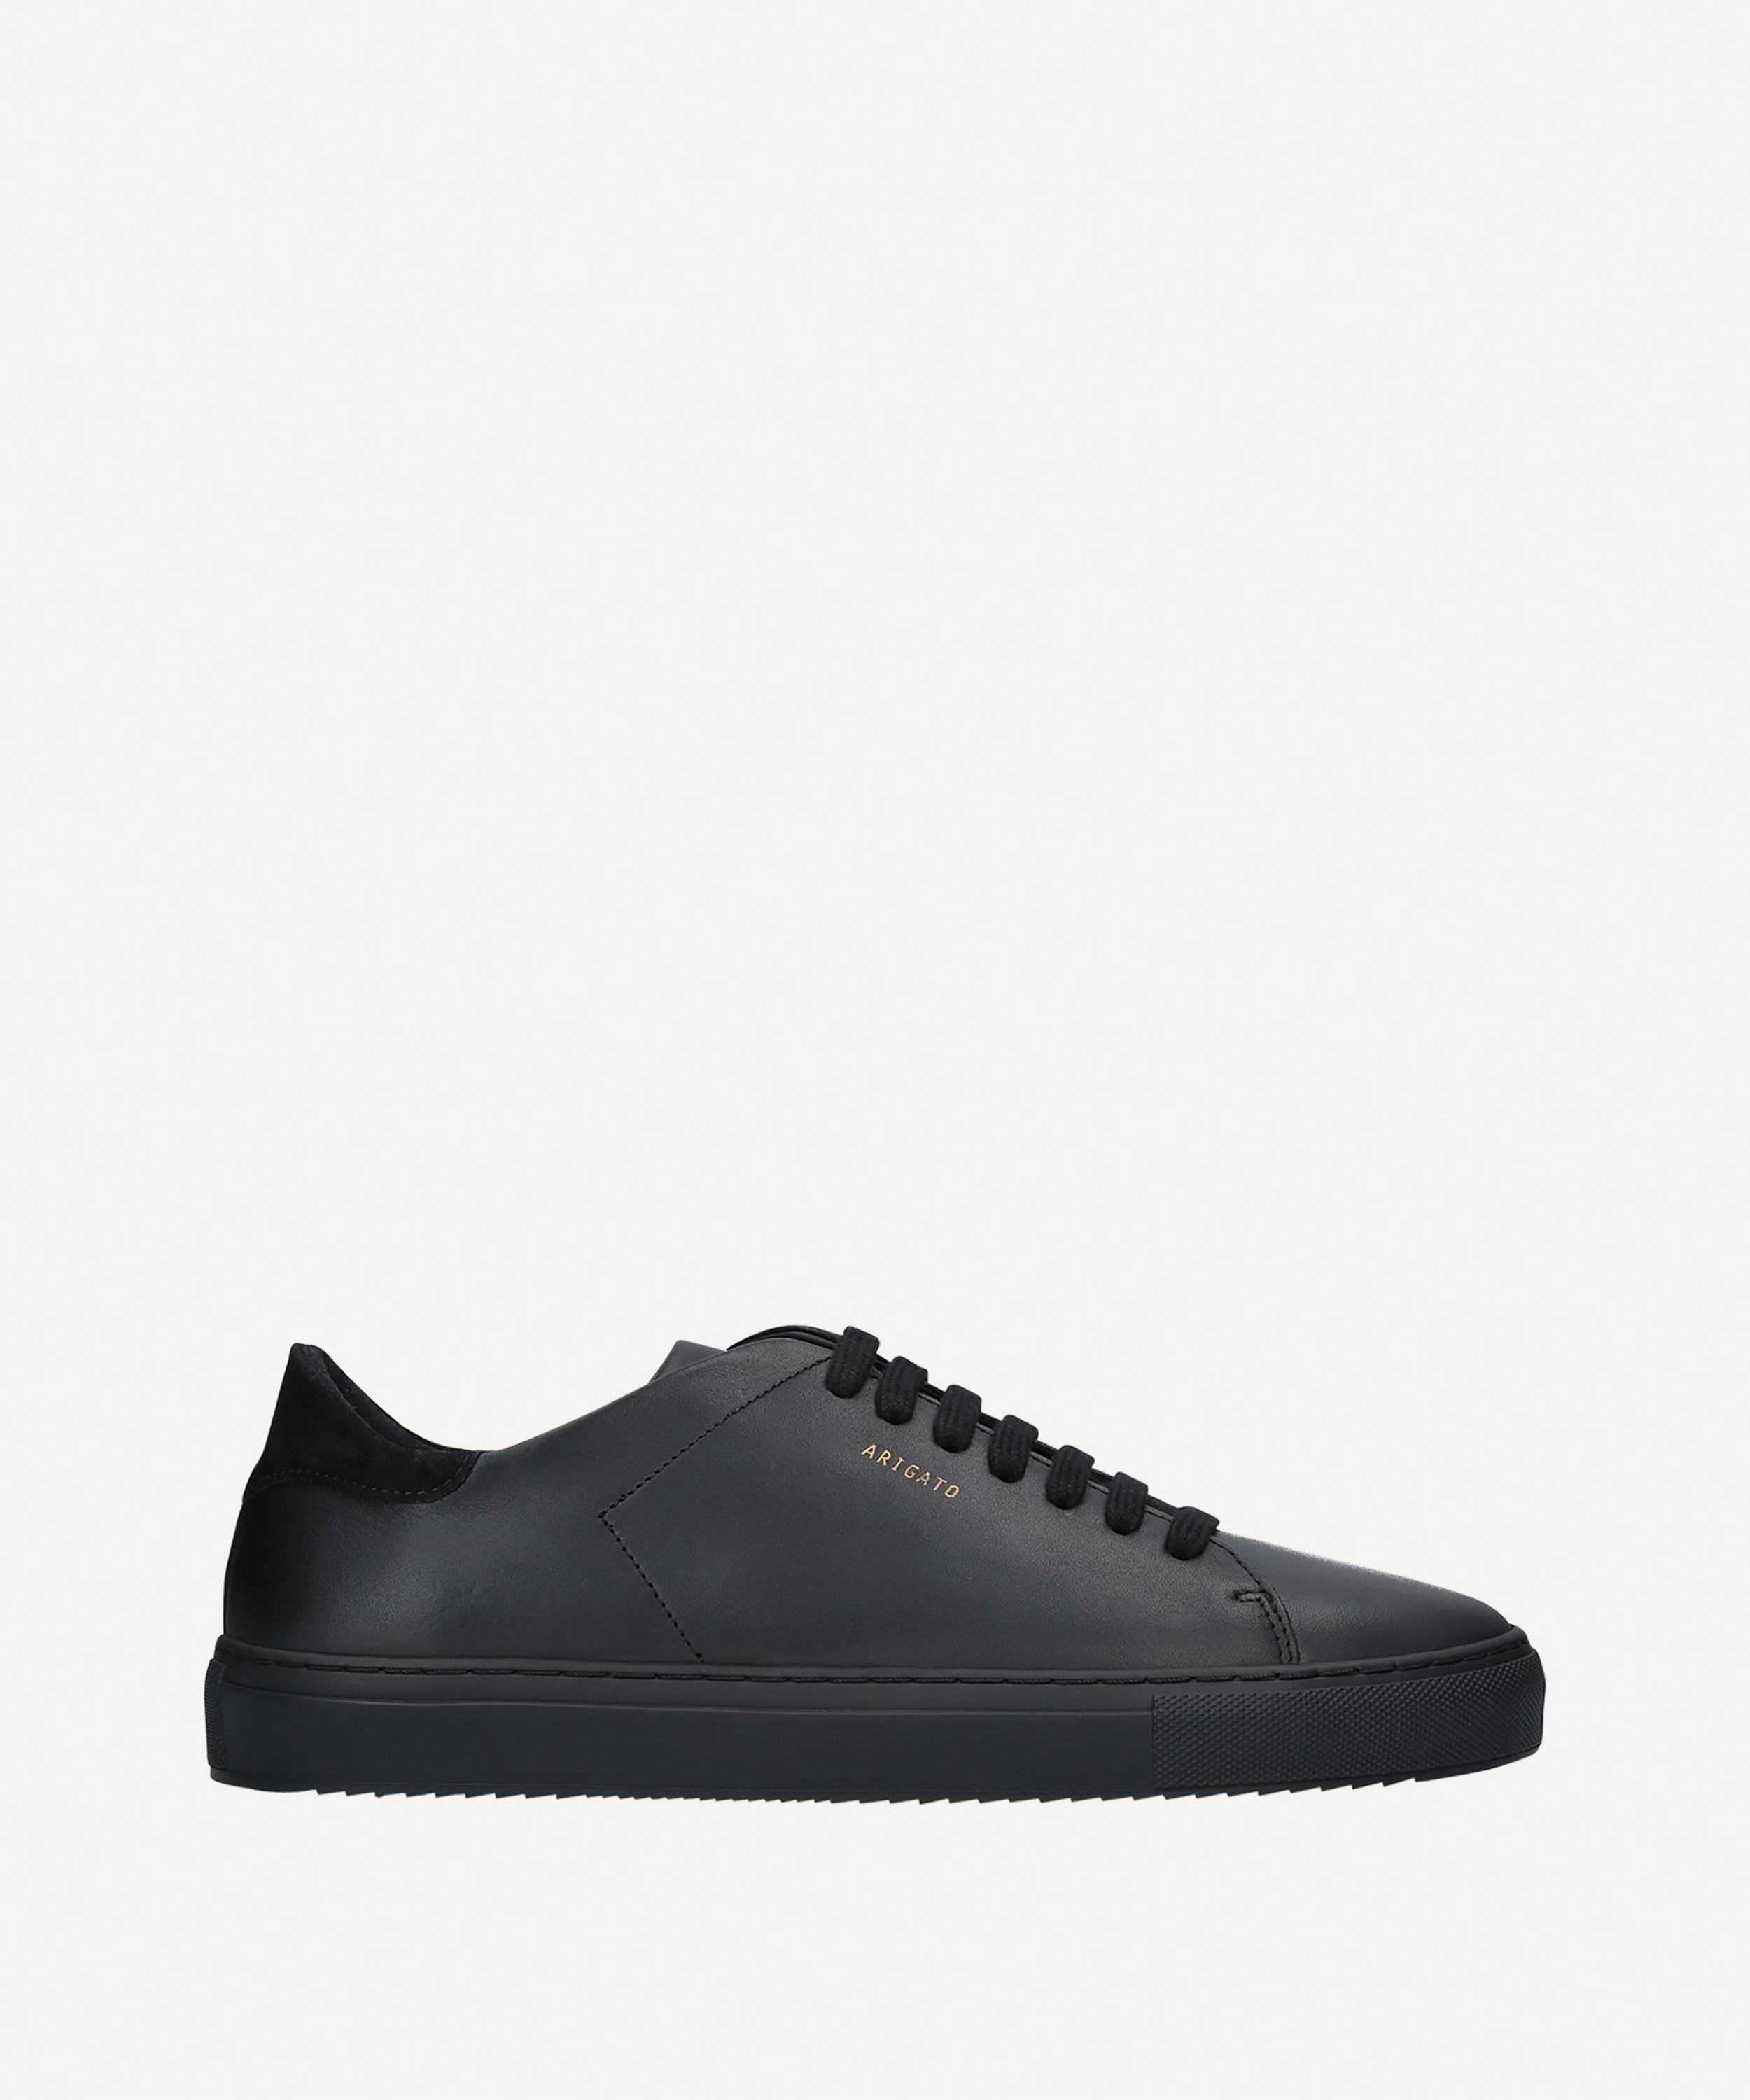 Axel Arigato Clean 90 Leather Sneakers in Black for Men - Lyst